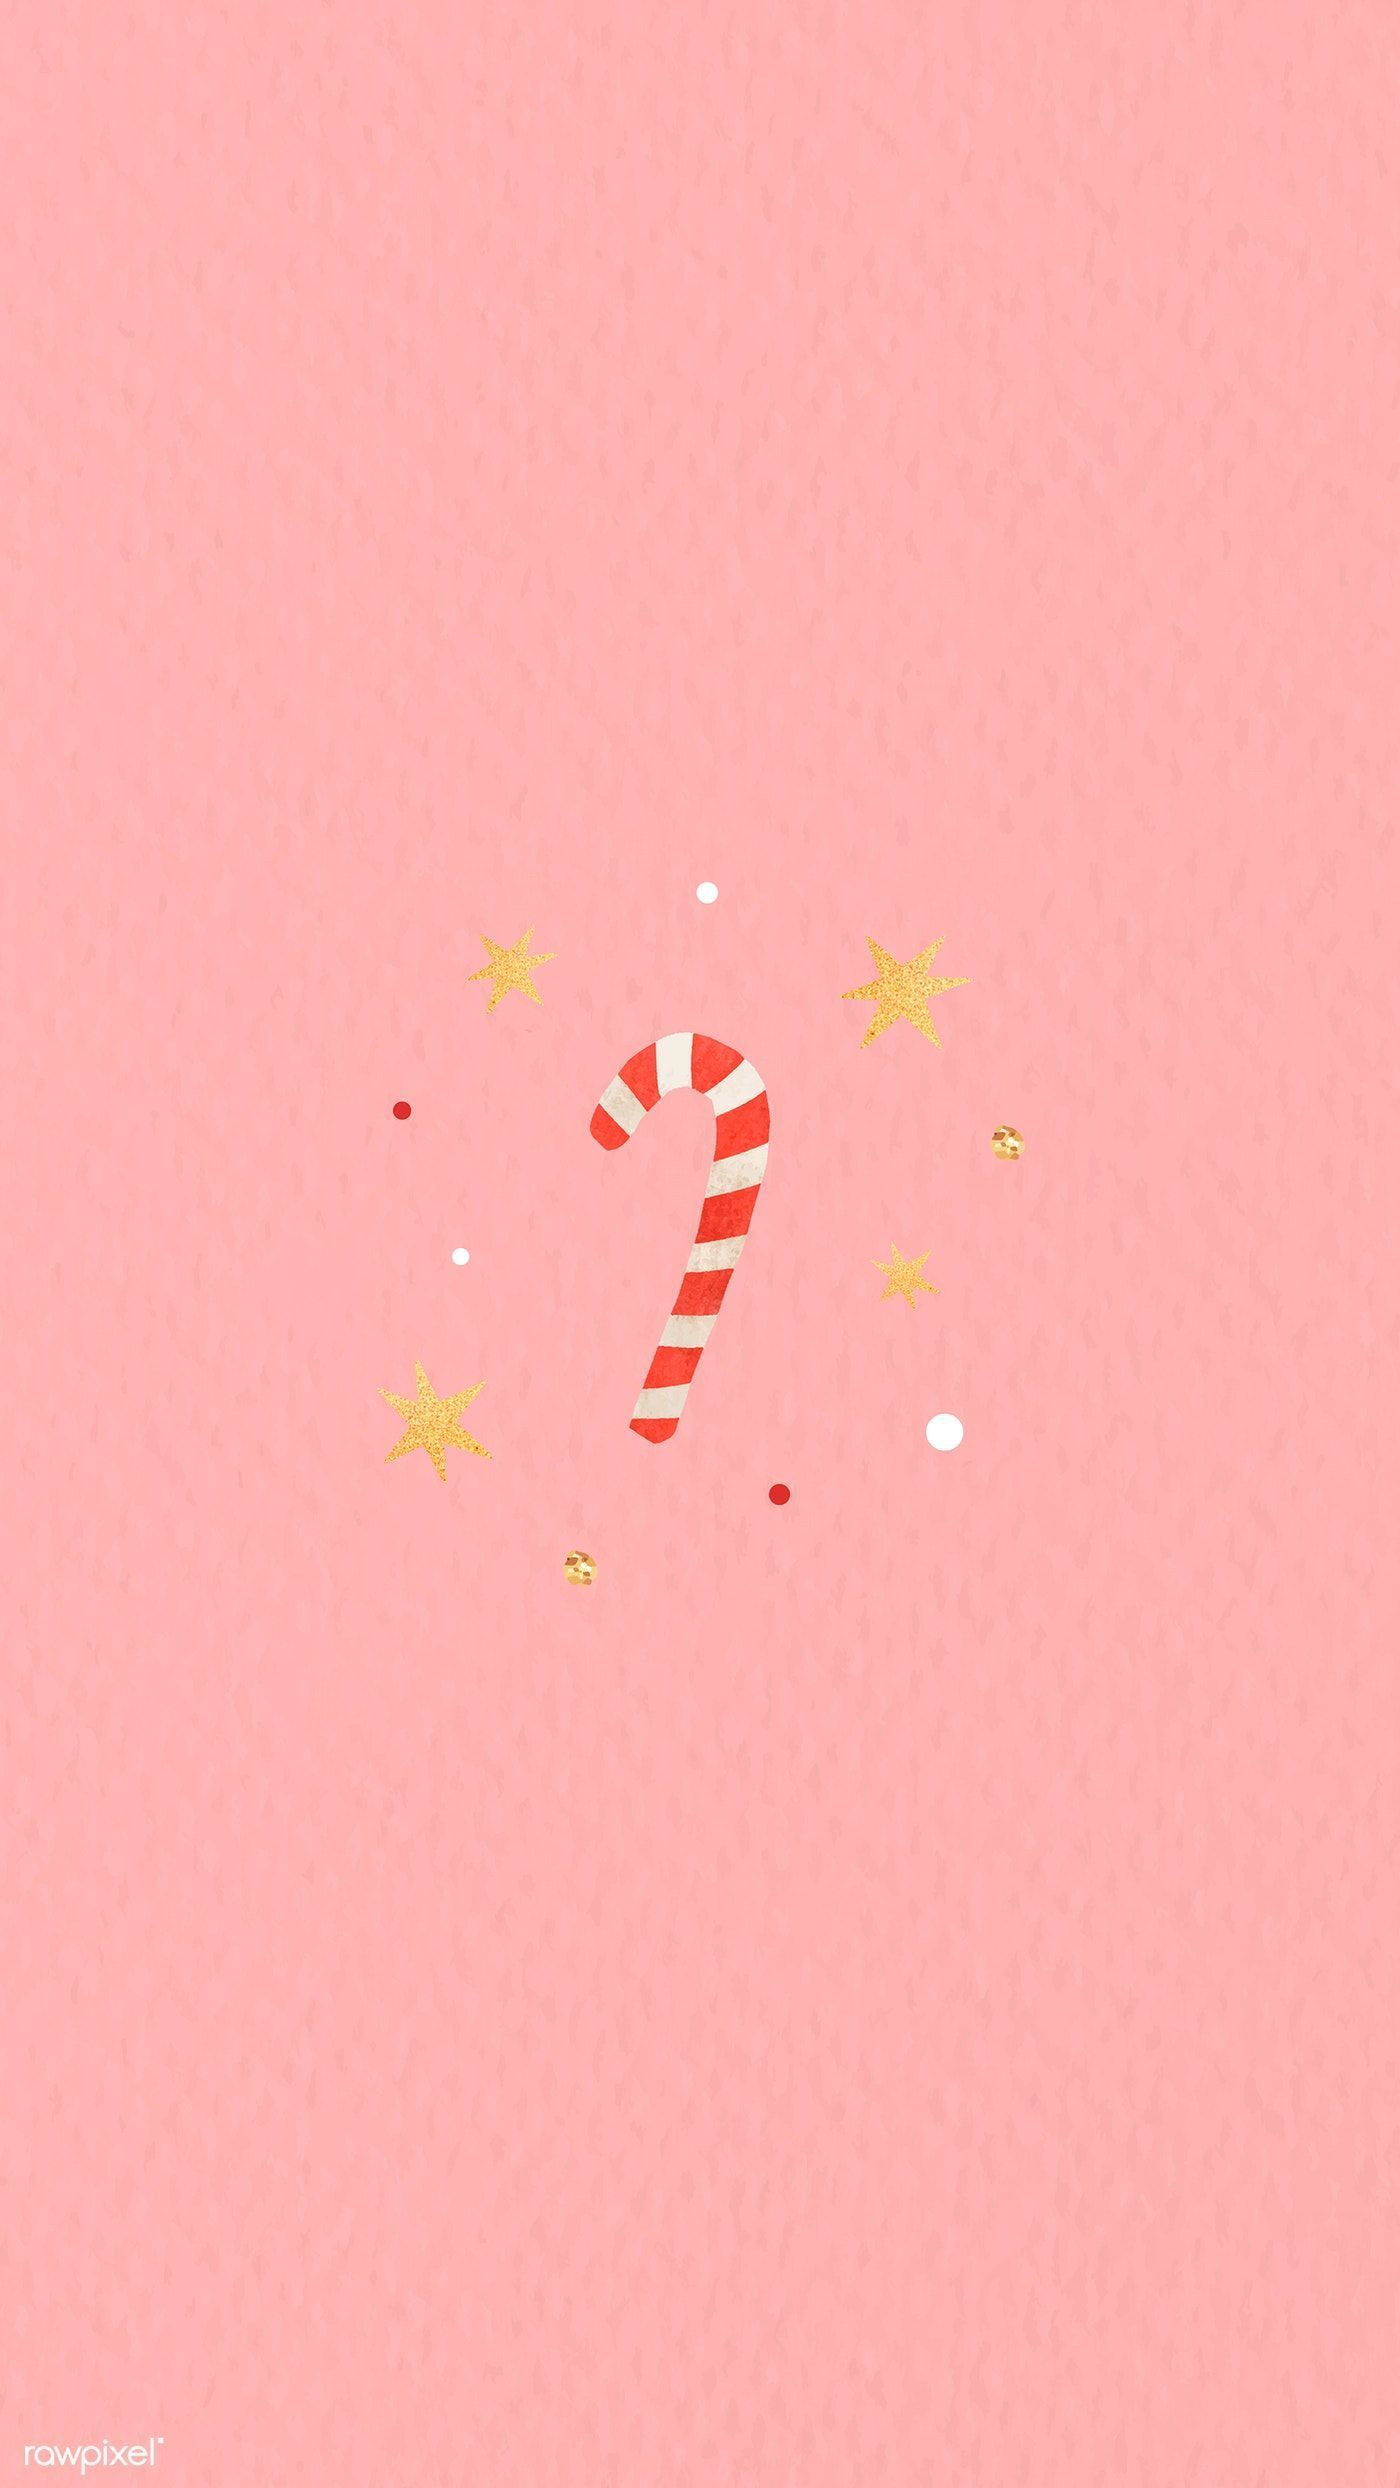 A candy cane and stars on pink background - Candy, candy cane